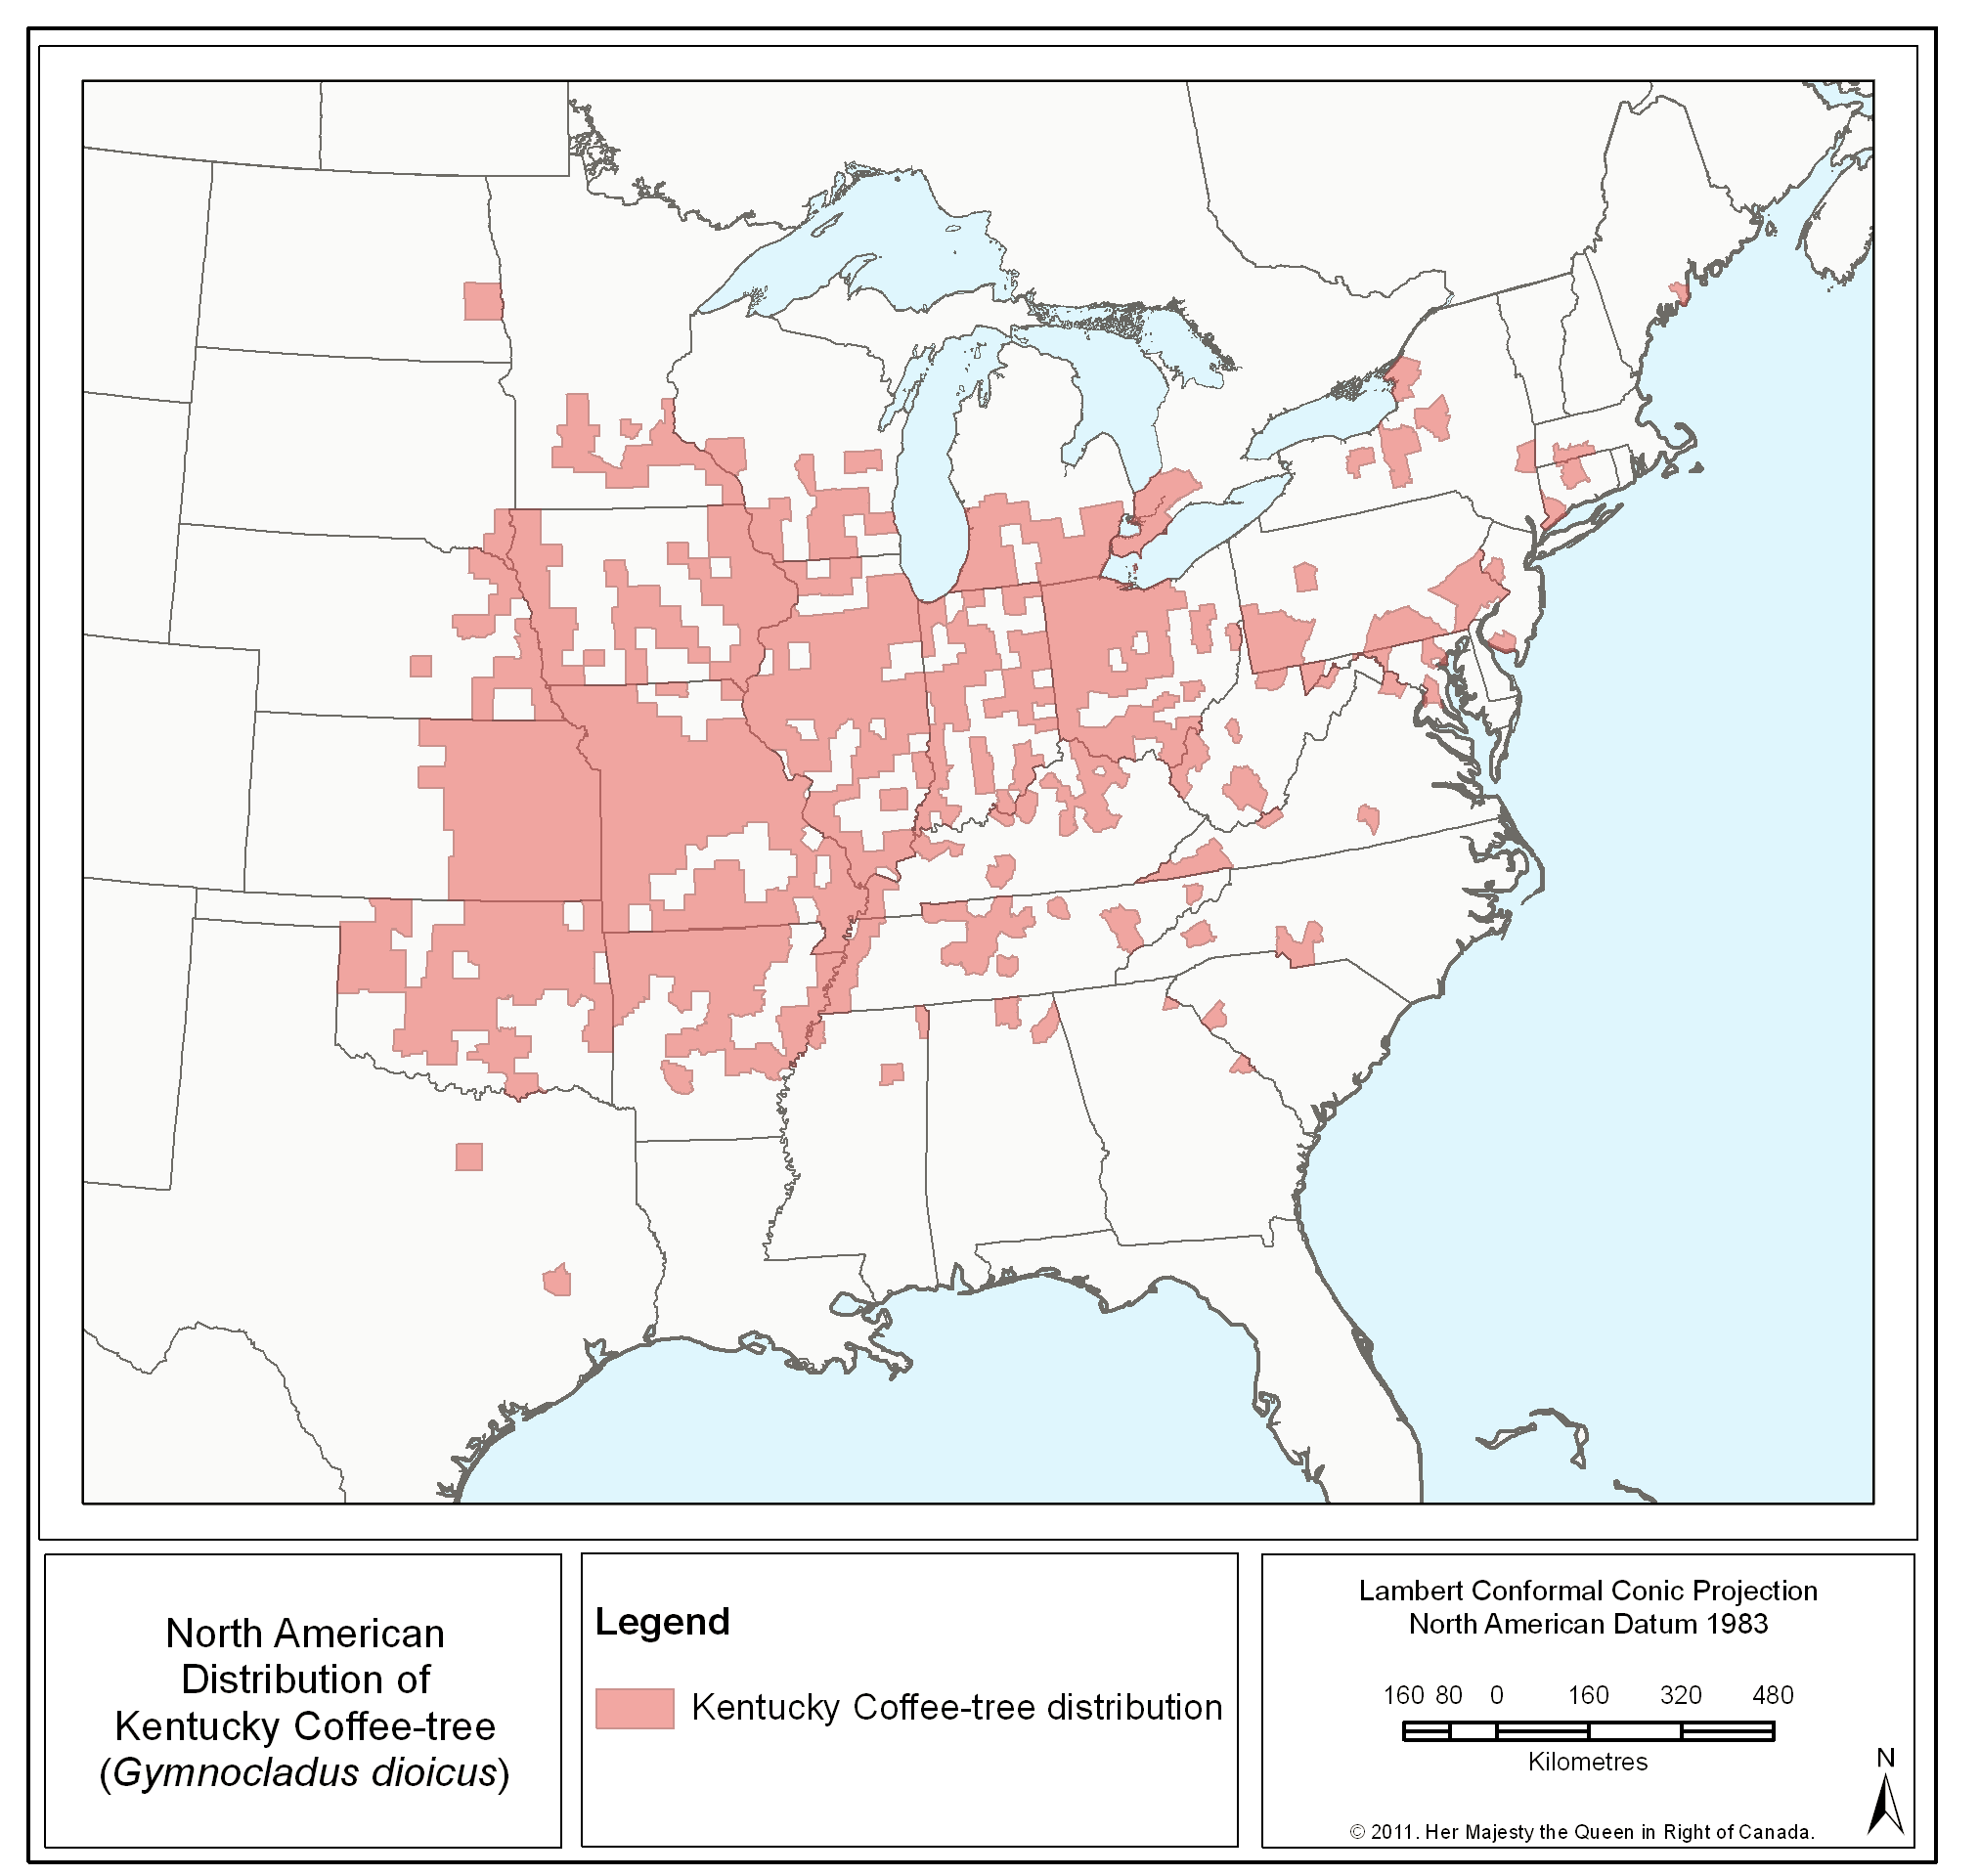 a map showing the distribution of Kentucky Coffee-tree in north America.